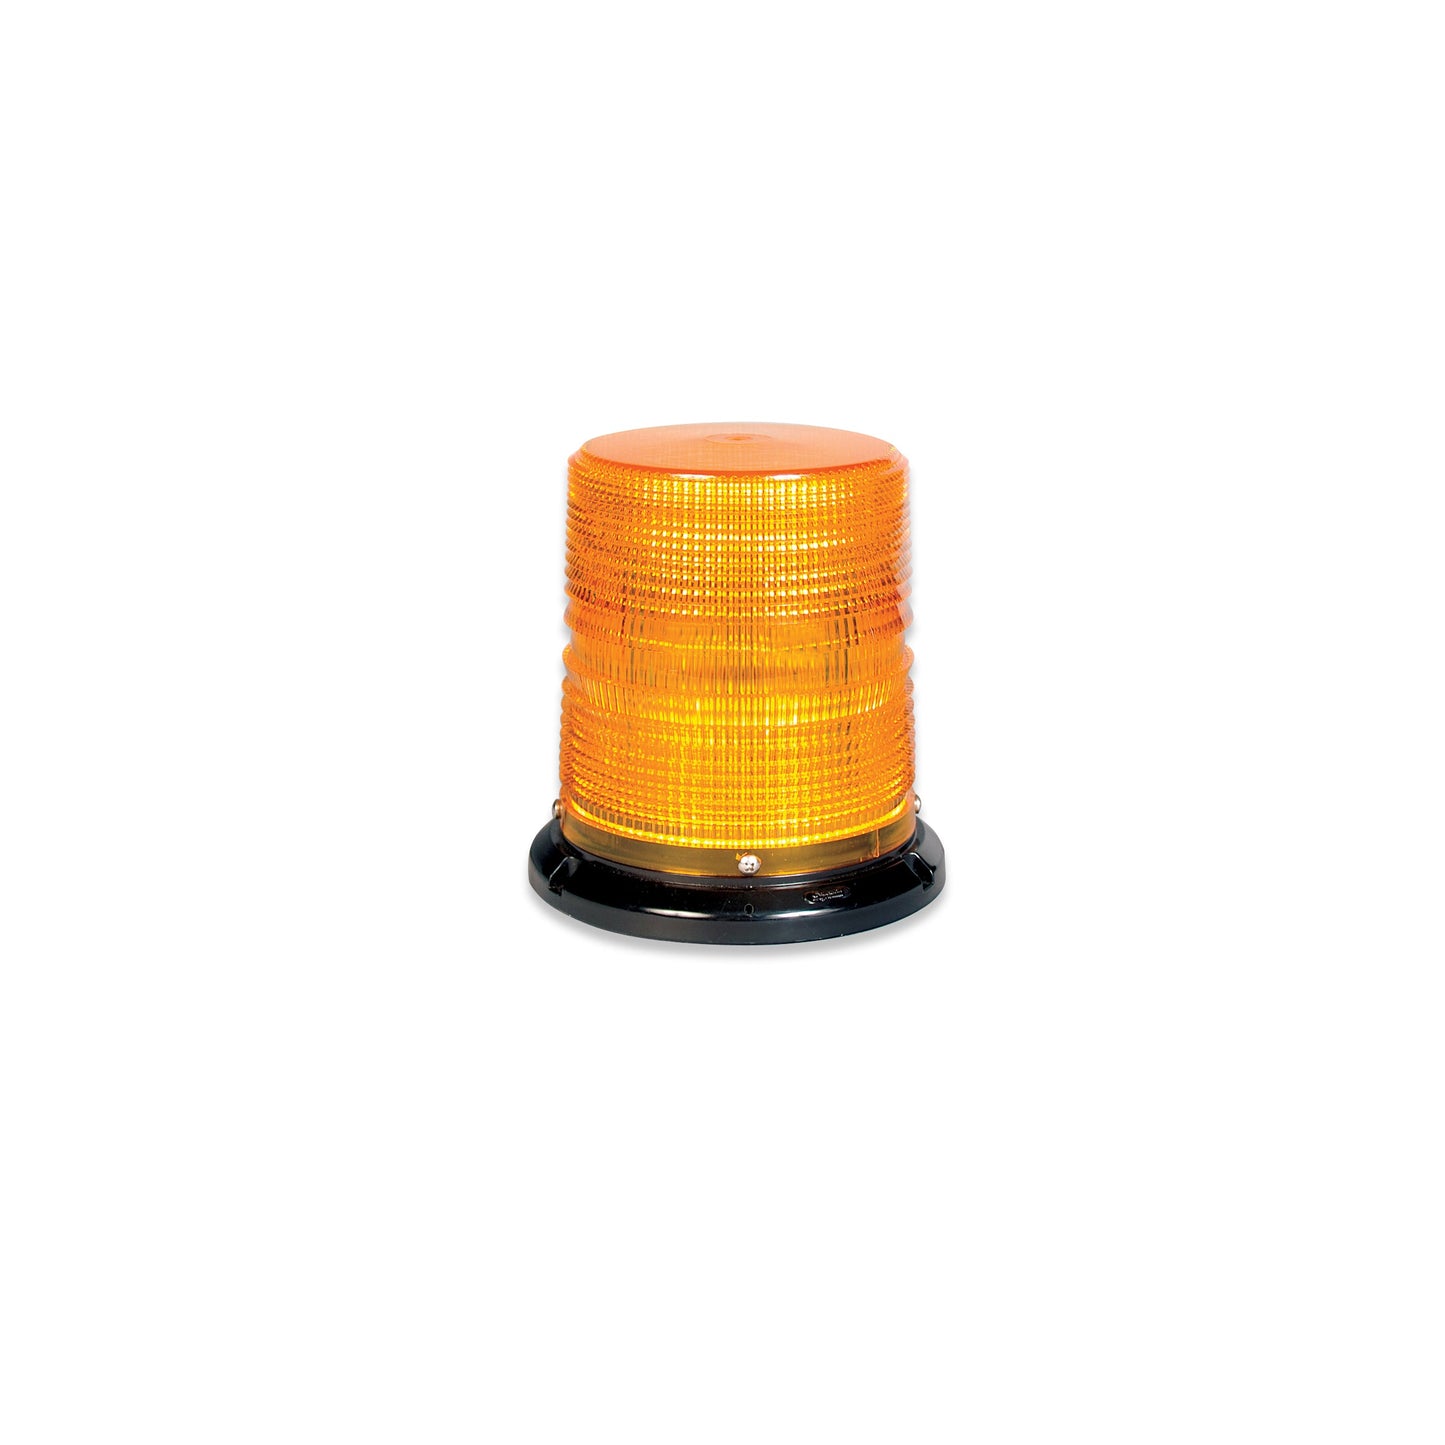 Soundoff Signal ELB45BCH0GG 4500 Series Led Beacon, 10-30V, Sae J845 Class 1 - Flat/Pipe Mount, 6" Green Dome/ Green Leds